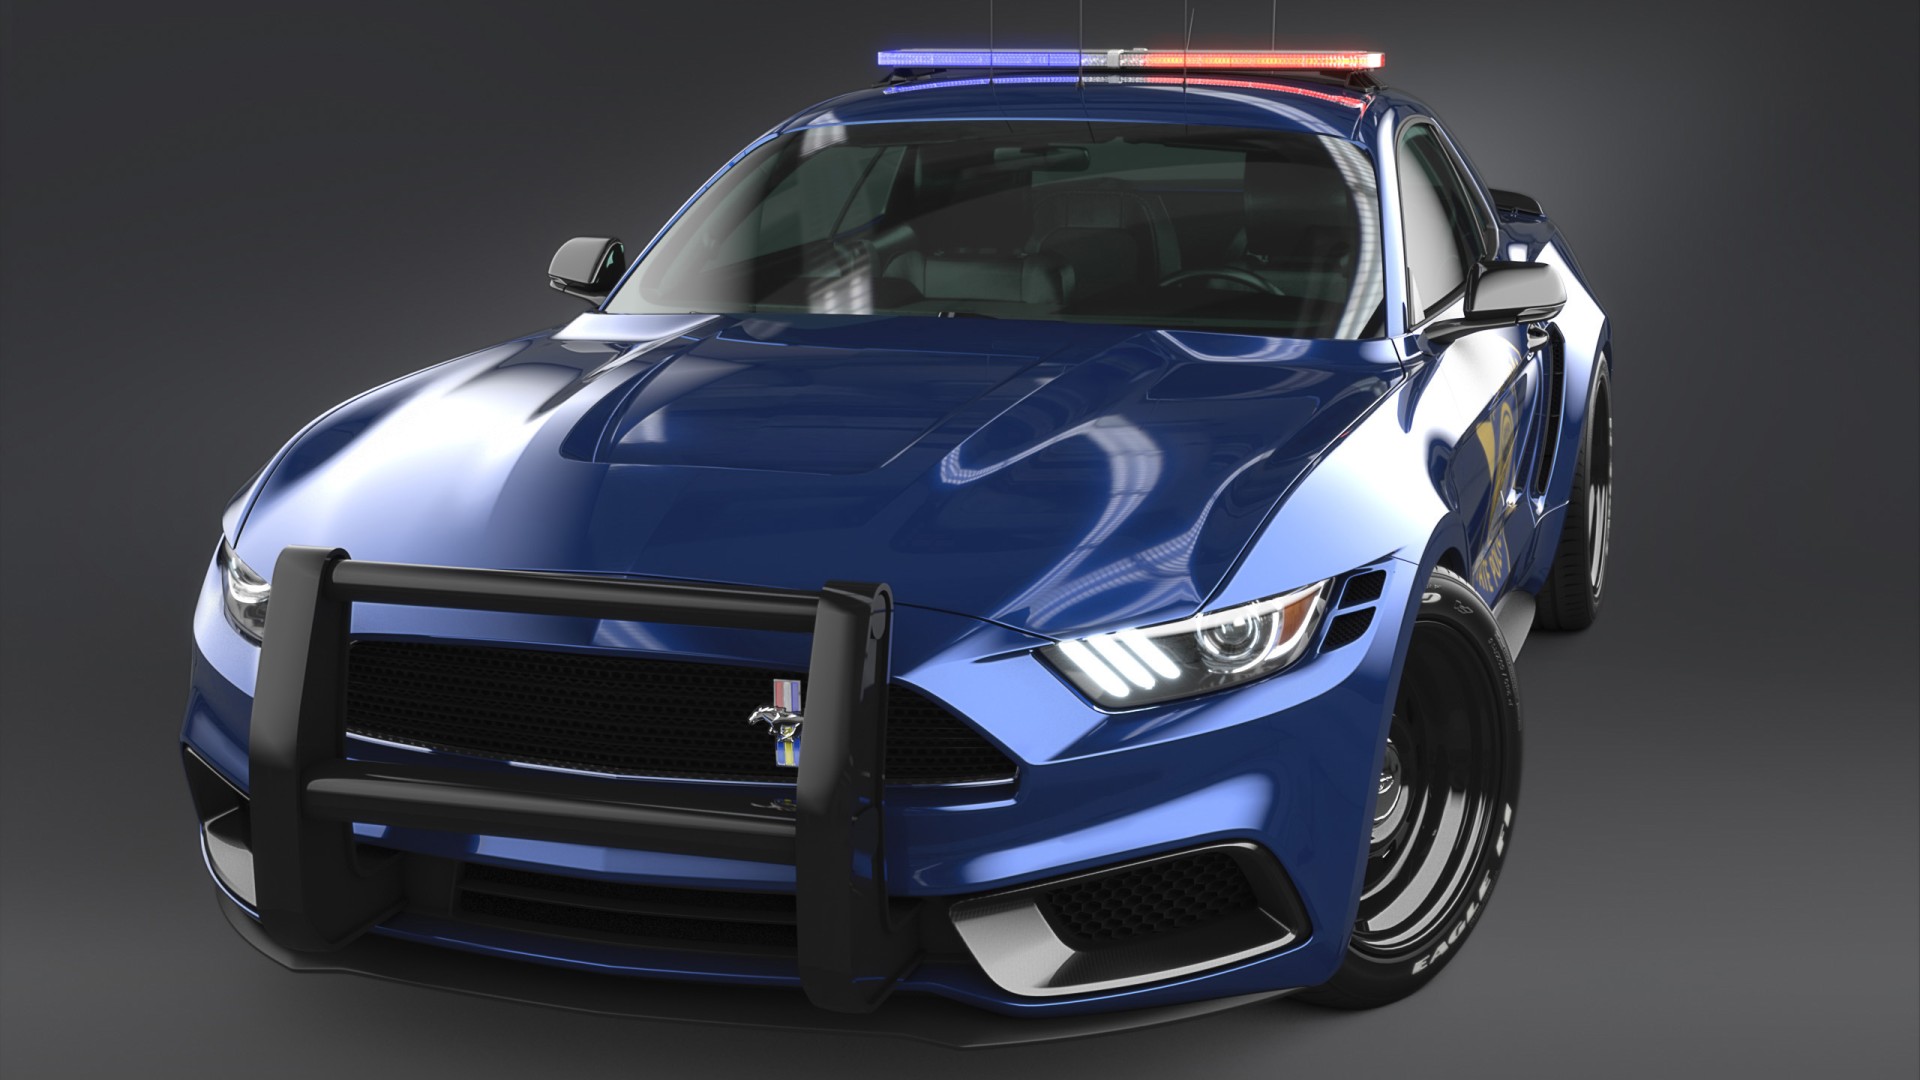 2017 Ford Mustang NotchBack Design Police 3 Wallpaper | HD Car Wallpapers | ID #76501366 x 768